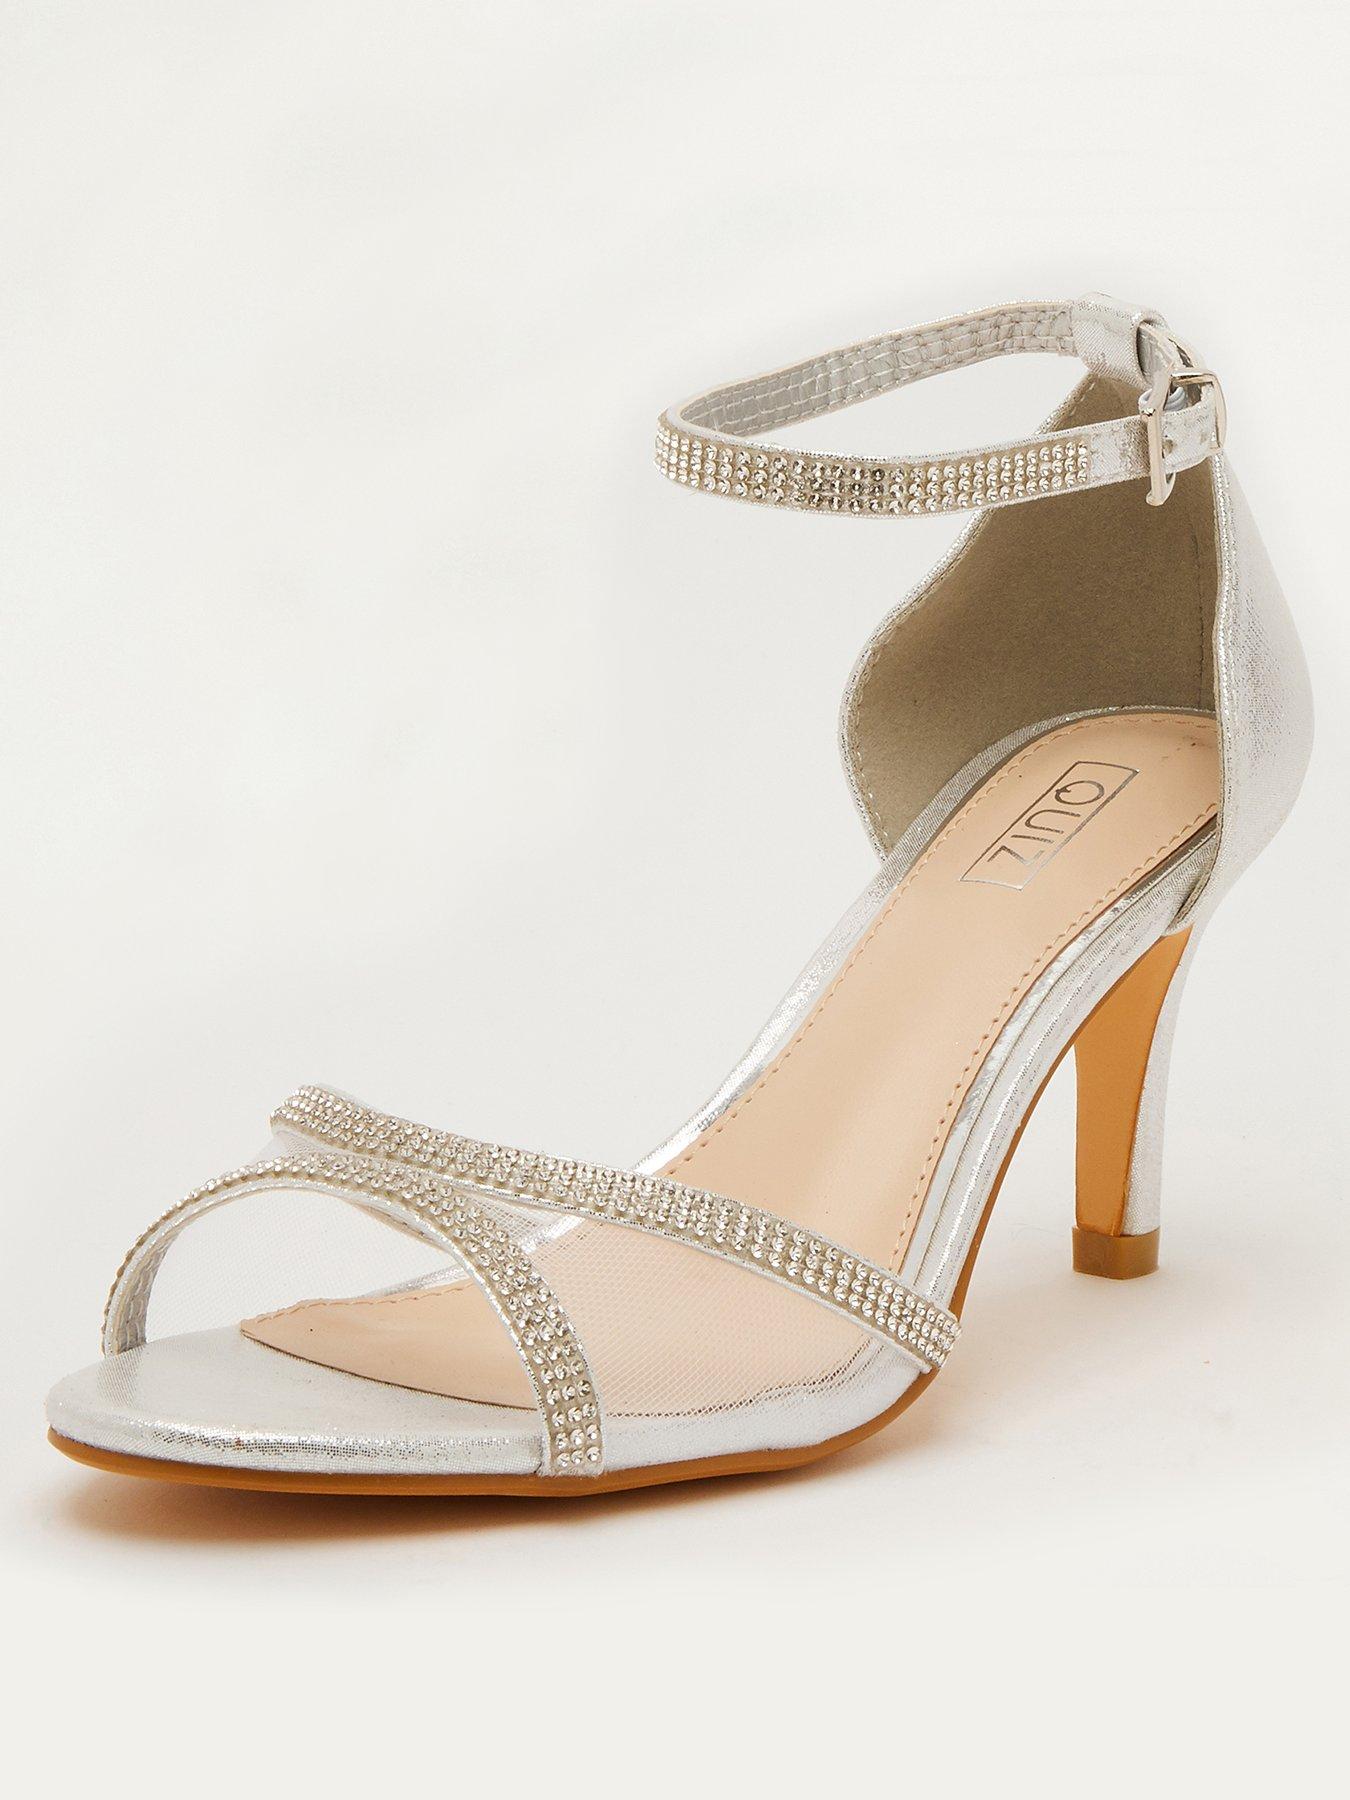 CWH High Heel Sandal silver-colored casual look Shoes High-Heeled Sandals High Heel Sandals 